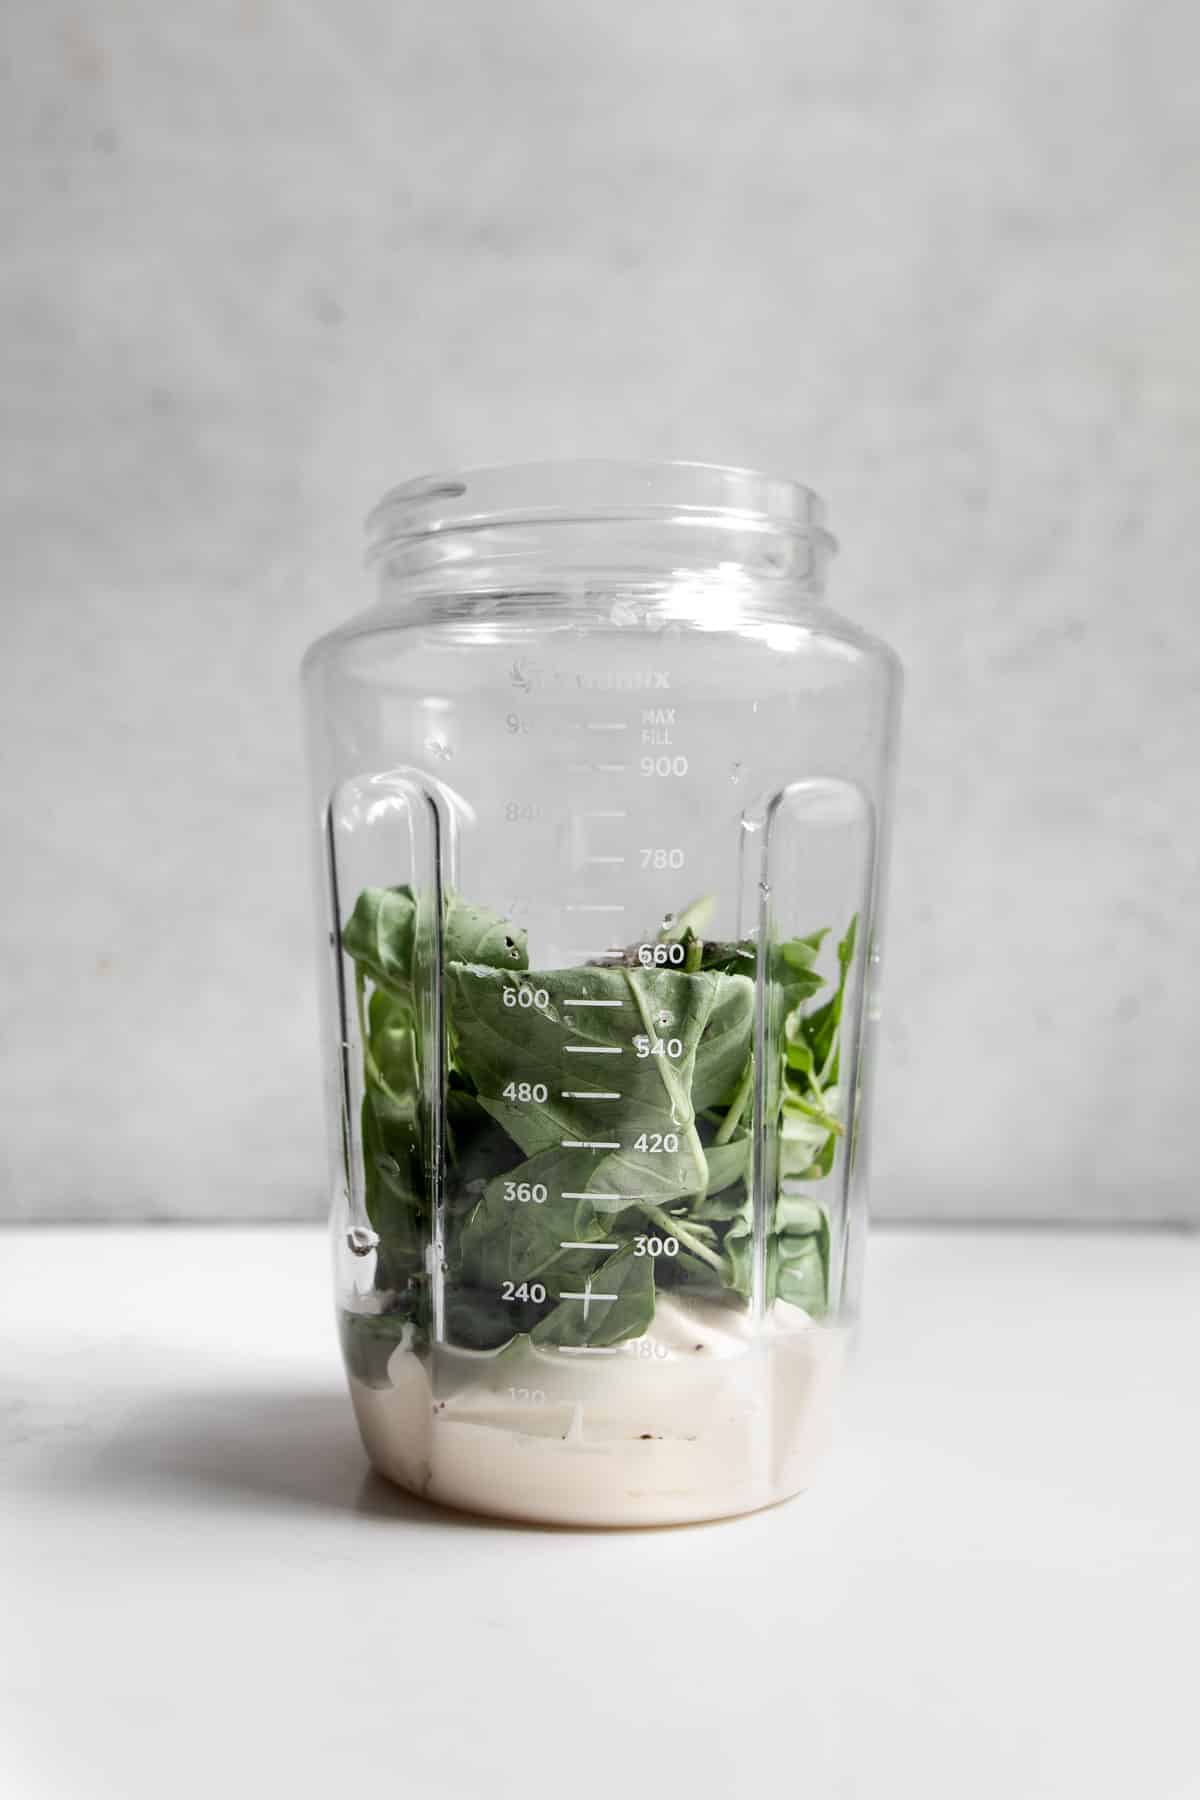 Mayonnaise and basil in a immersion blender container.